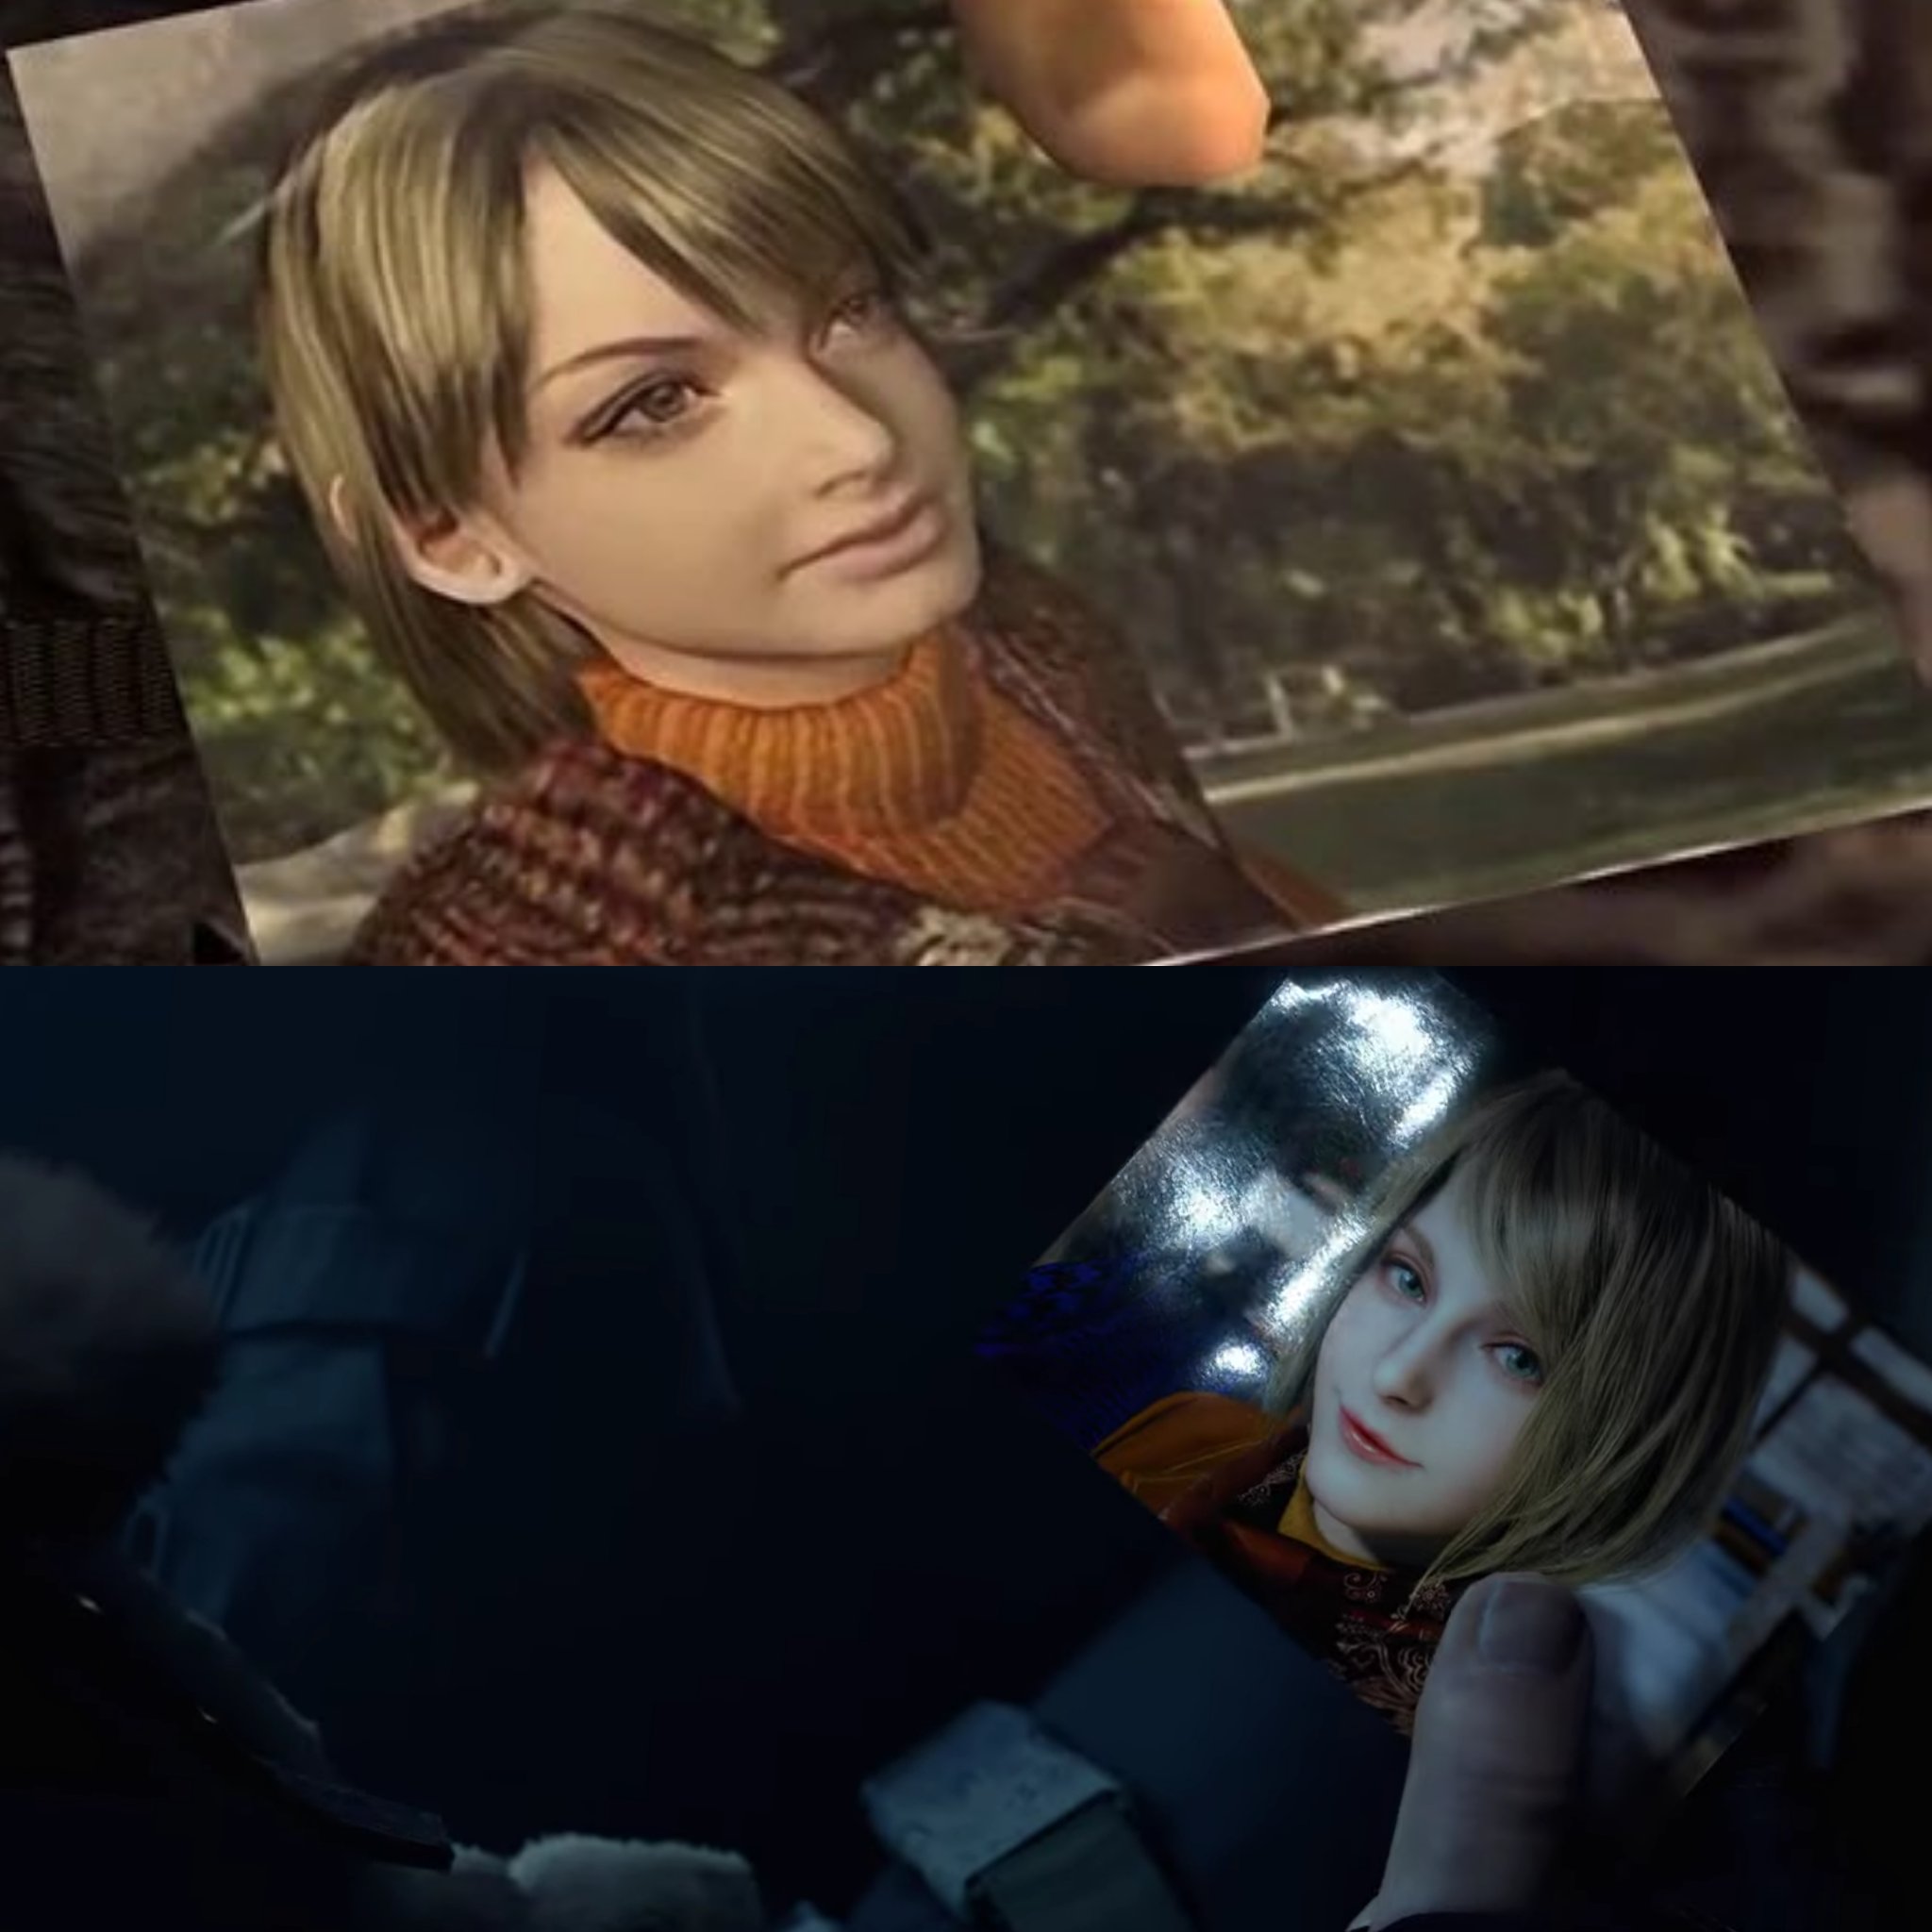 leon s. kennedy, ashley graham, and luis sera (resident evil and 2 more)